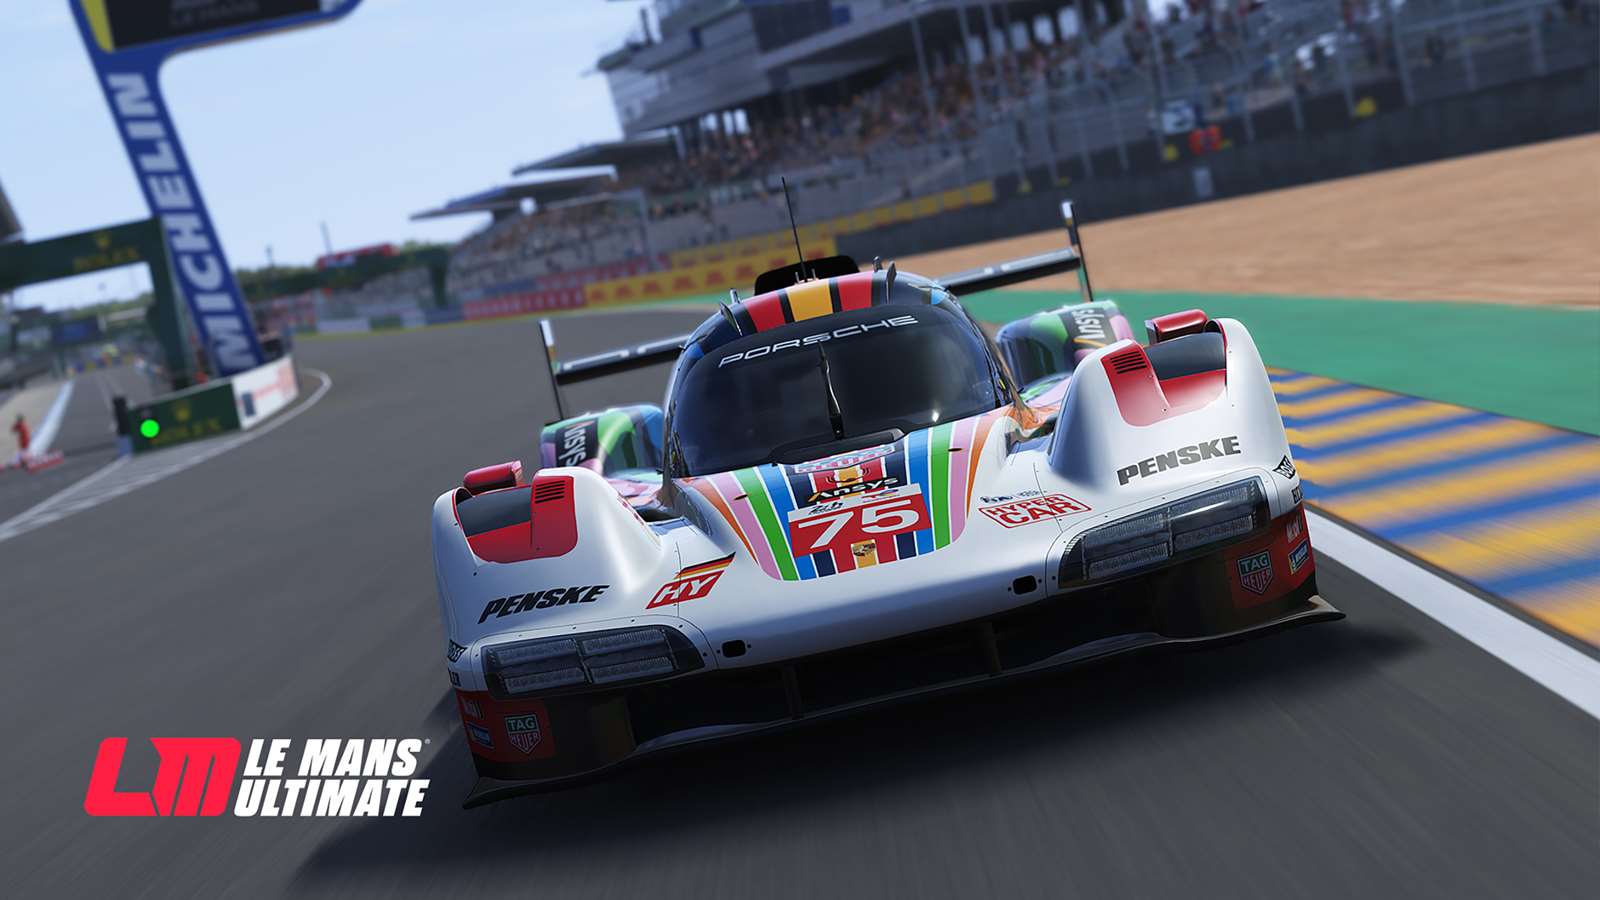 Porsche 963 as featured in the Le Mans Ultimate video game